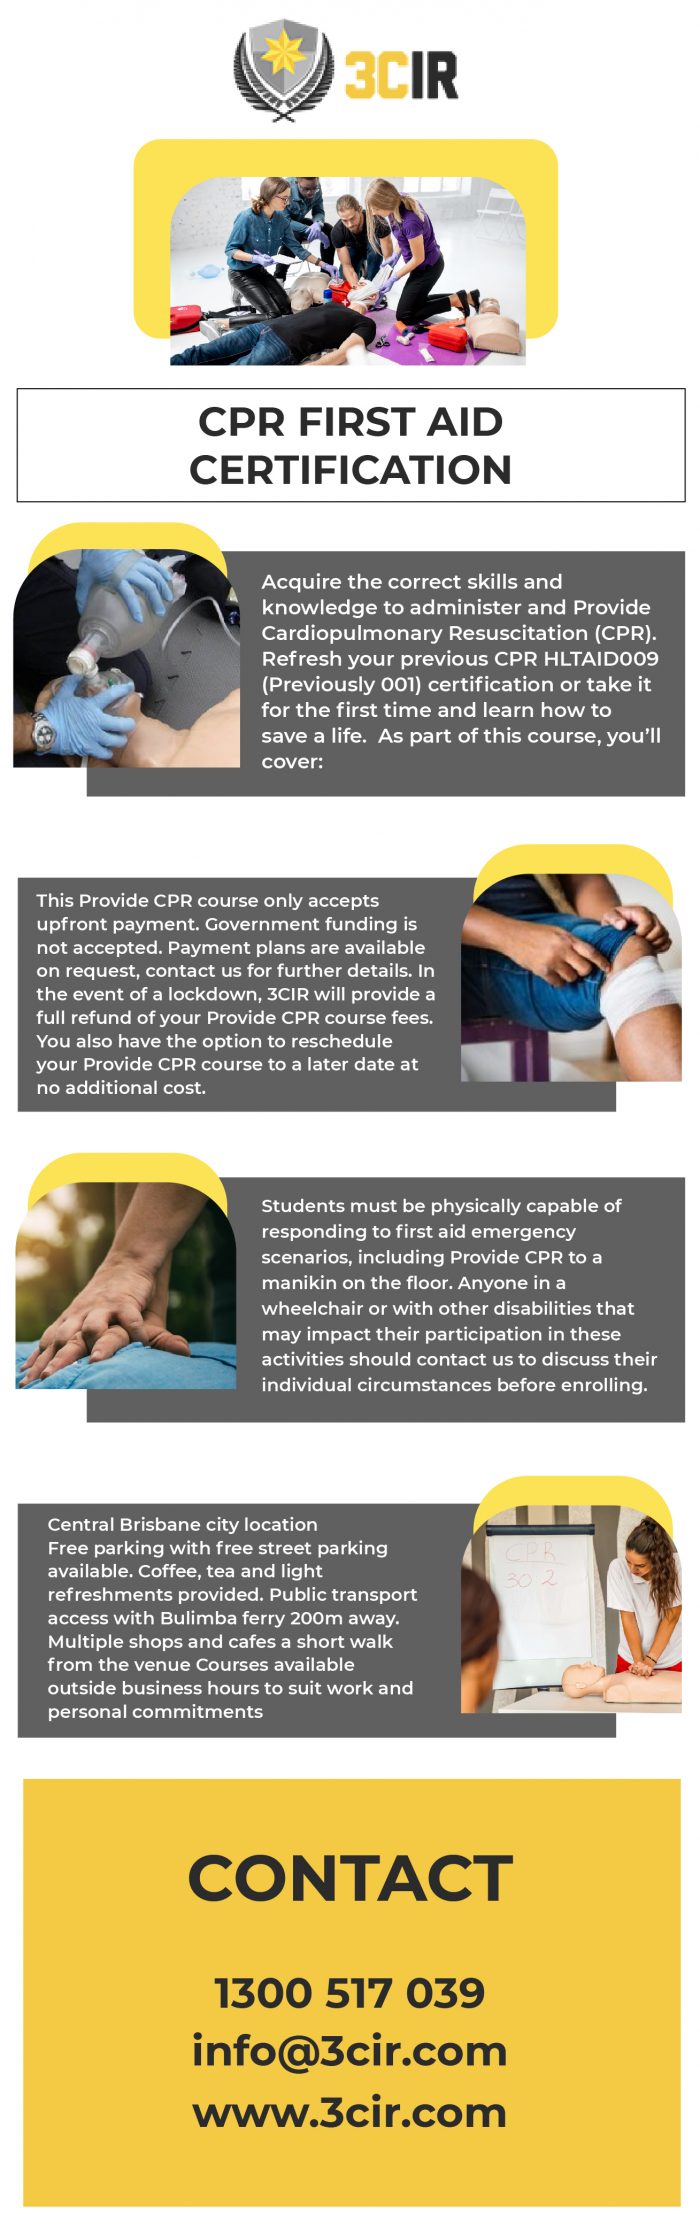 Best CPR First Aid Certification Courses | 3CIR